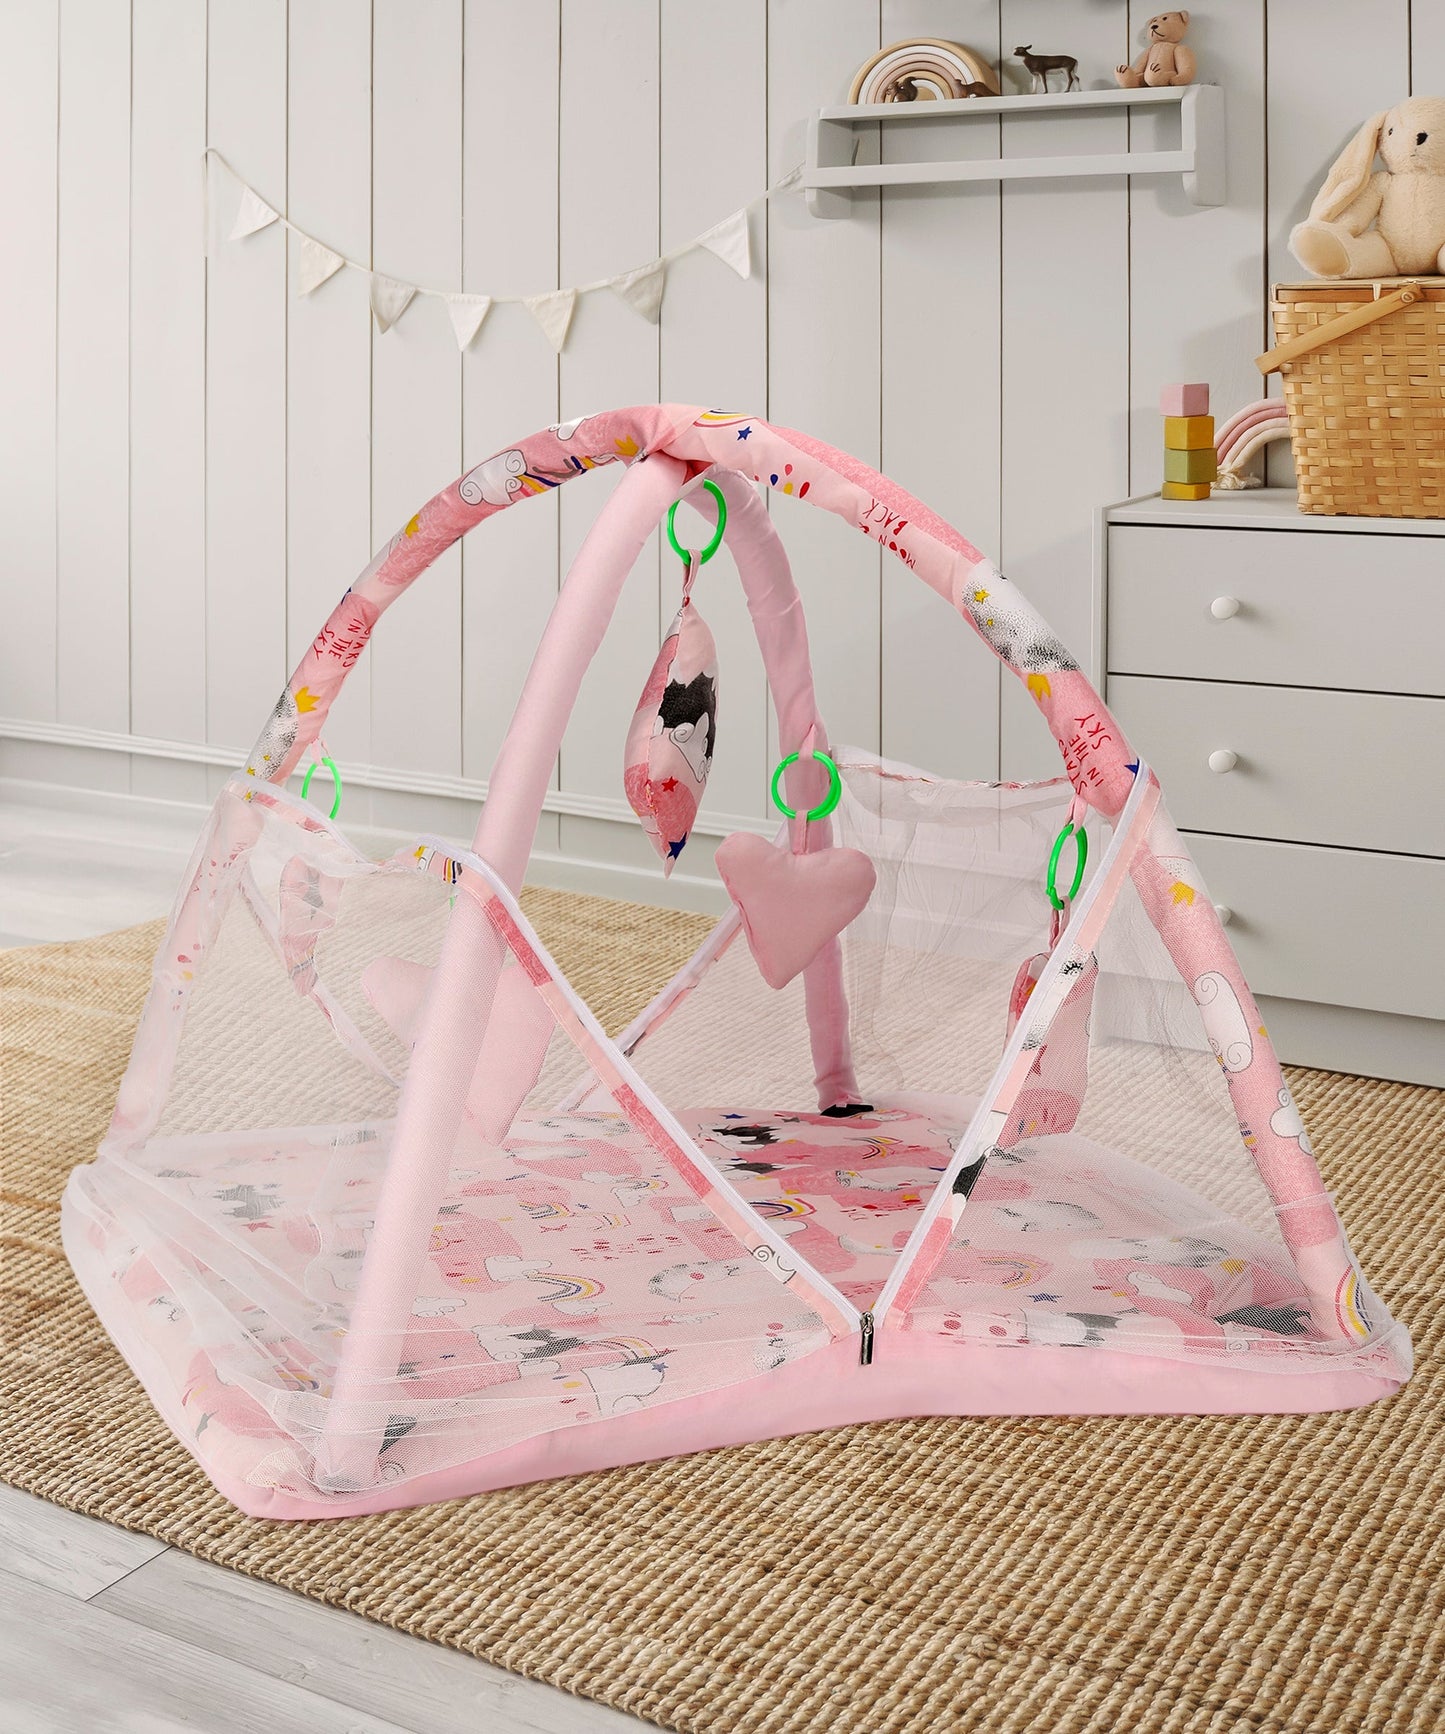 VParents Perry Baby Bedding Set/Baby Bedding Mattress Set with Mosquito Net/Baby Bed Set and Baby Play Gym with Mosquito Net